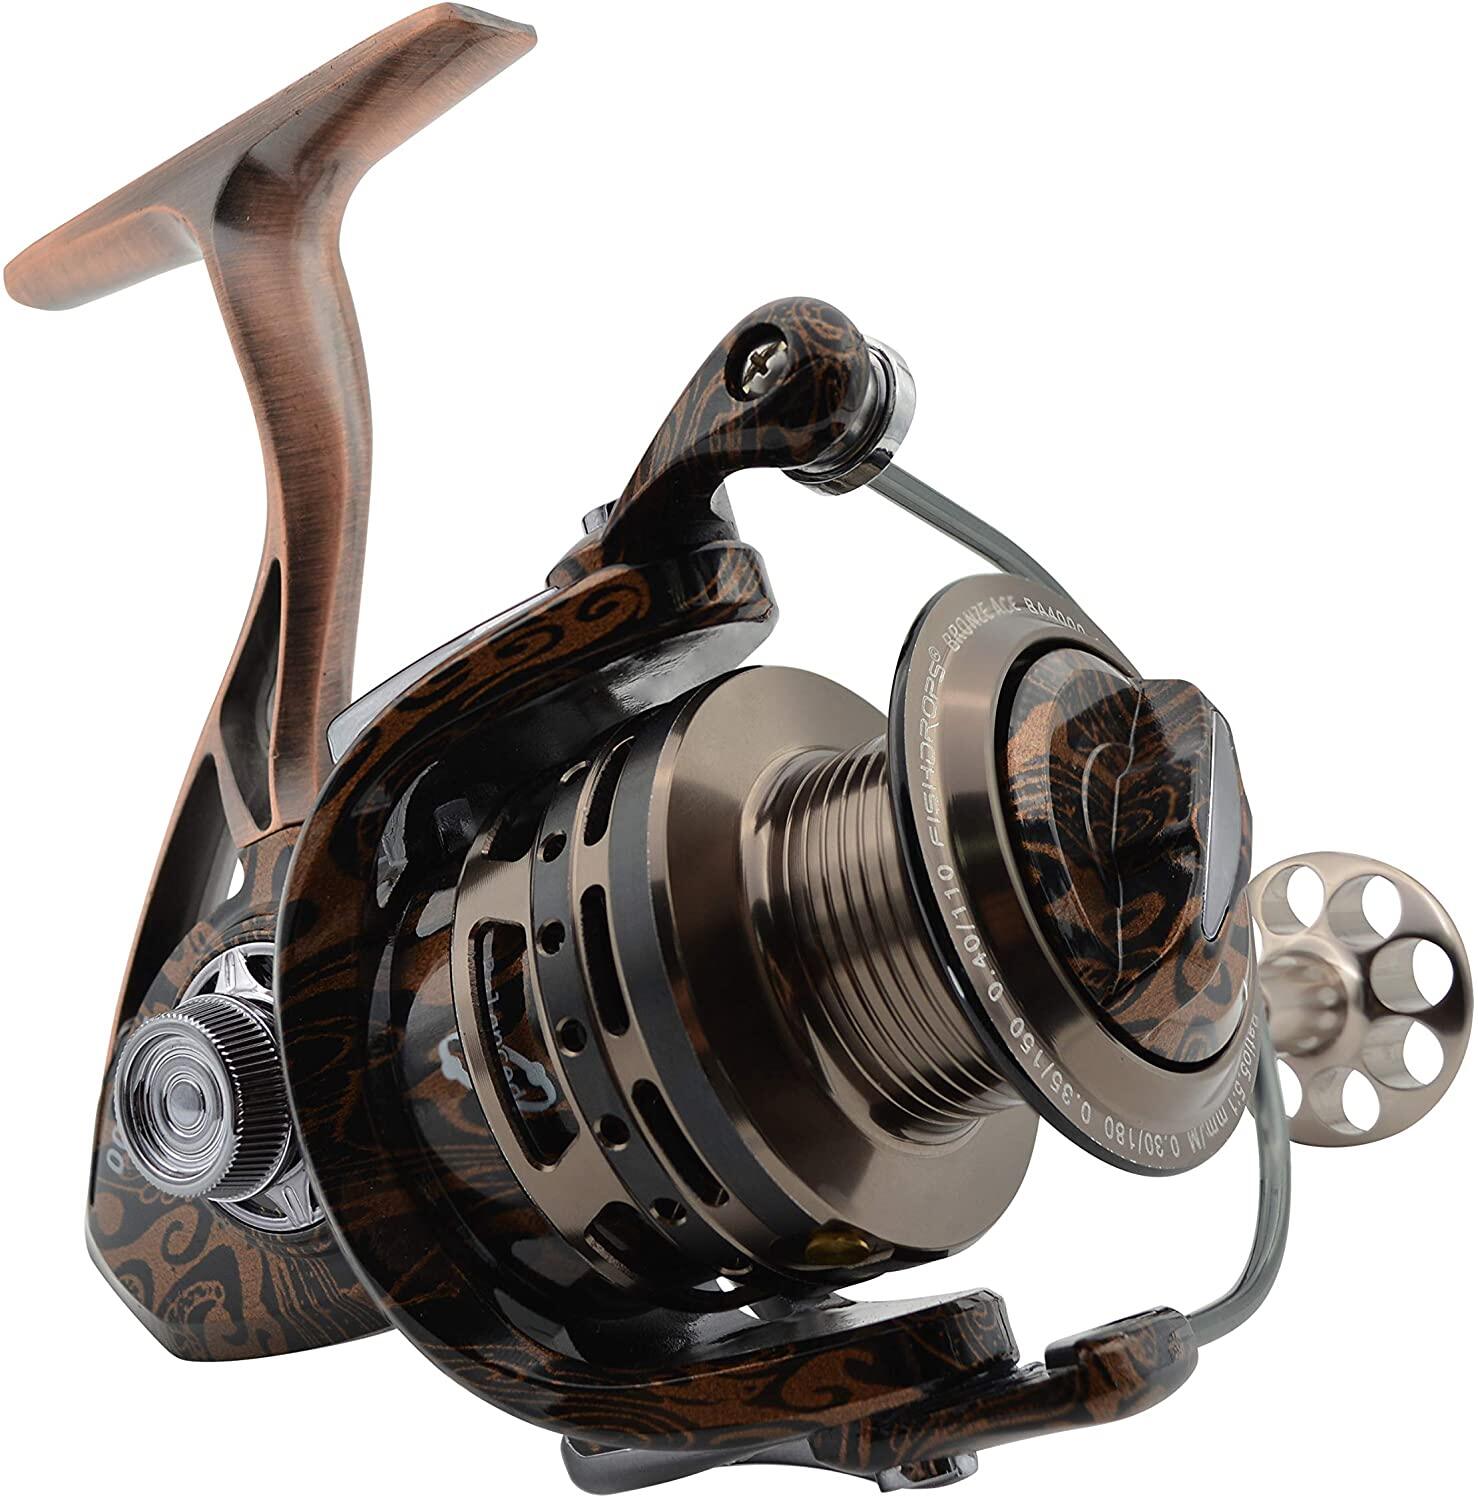 Fishdrops Spinning Fishing Reel - Full Metal Body Aluminum Fishing Reels  Spinning, 15.5 LB Max Drag, 13+1BB, Ultra Smooth Powerful for Freshwater  and Saltwater Fishing